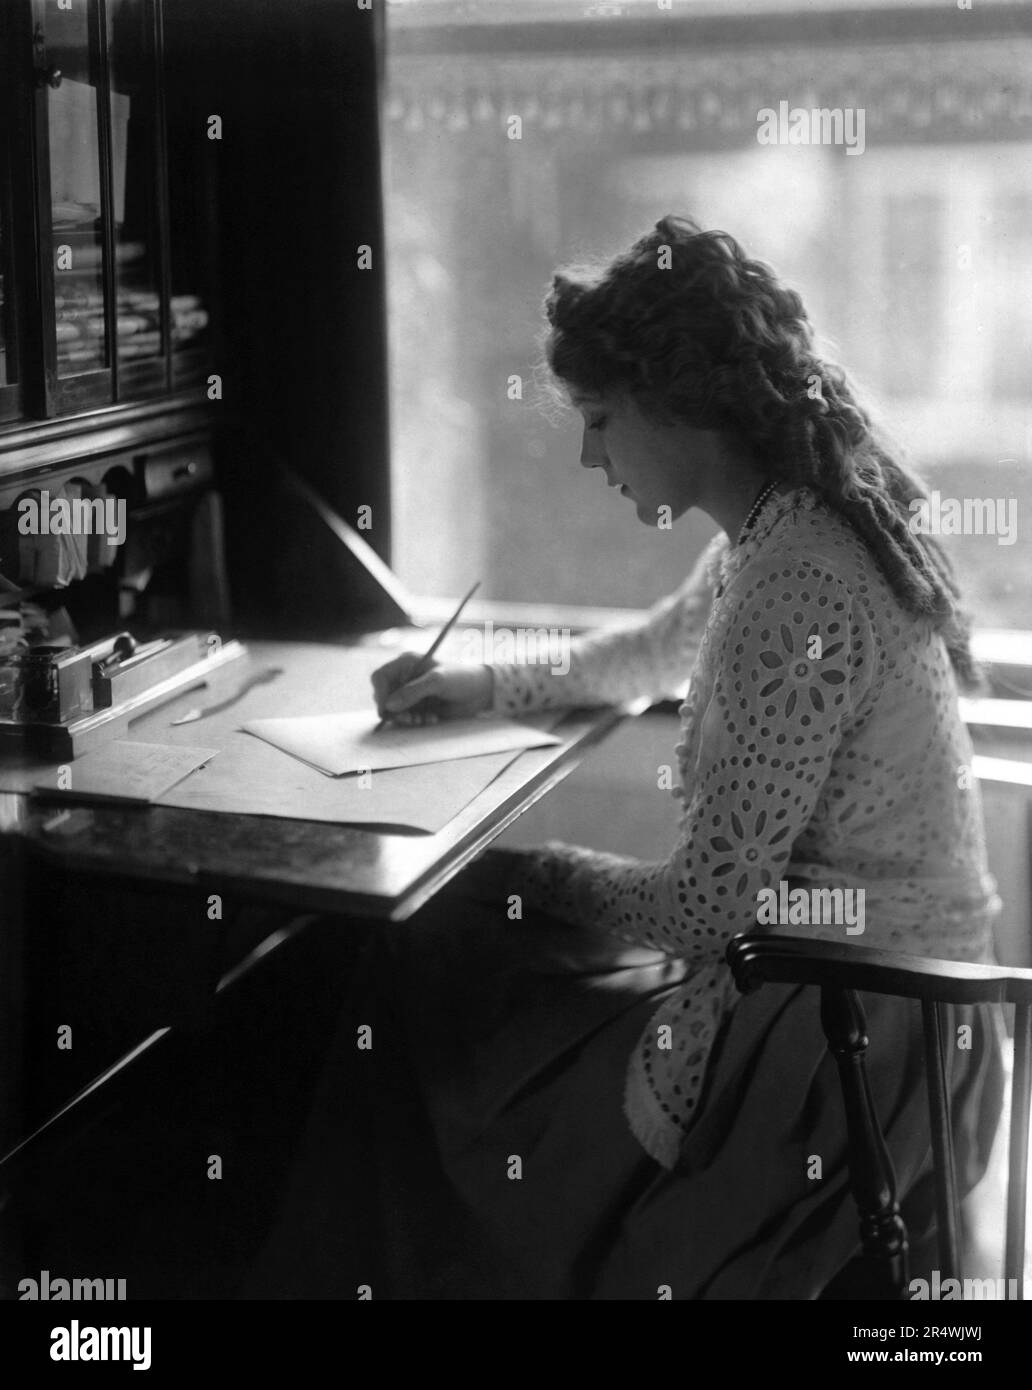 Photograph of Mary Pickford (1892-1979) Canadian-American motion picture actress, co-founder of the film studio United Artists and one of the original 36 founders of the Academy of Motion Picture Arts and Sciences. Dated 1929 Stock Photo